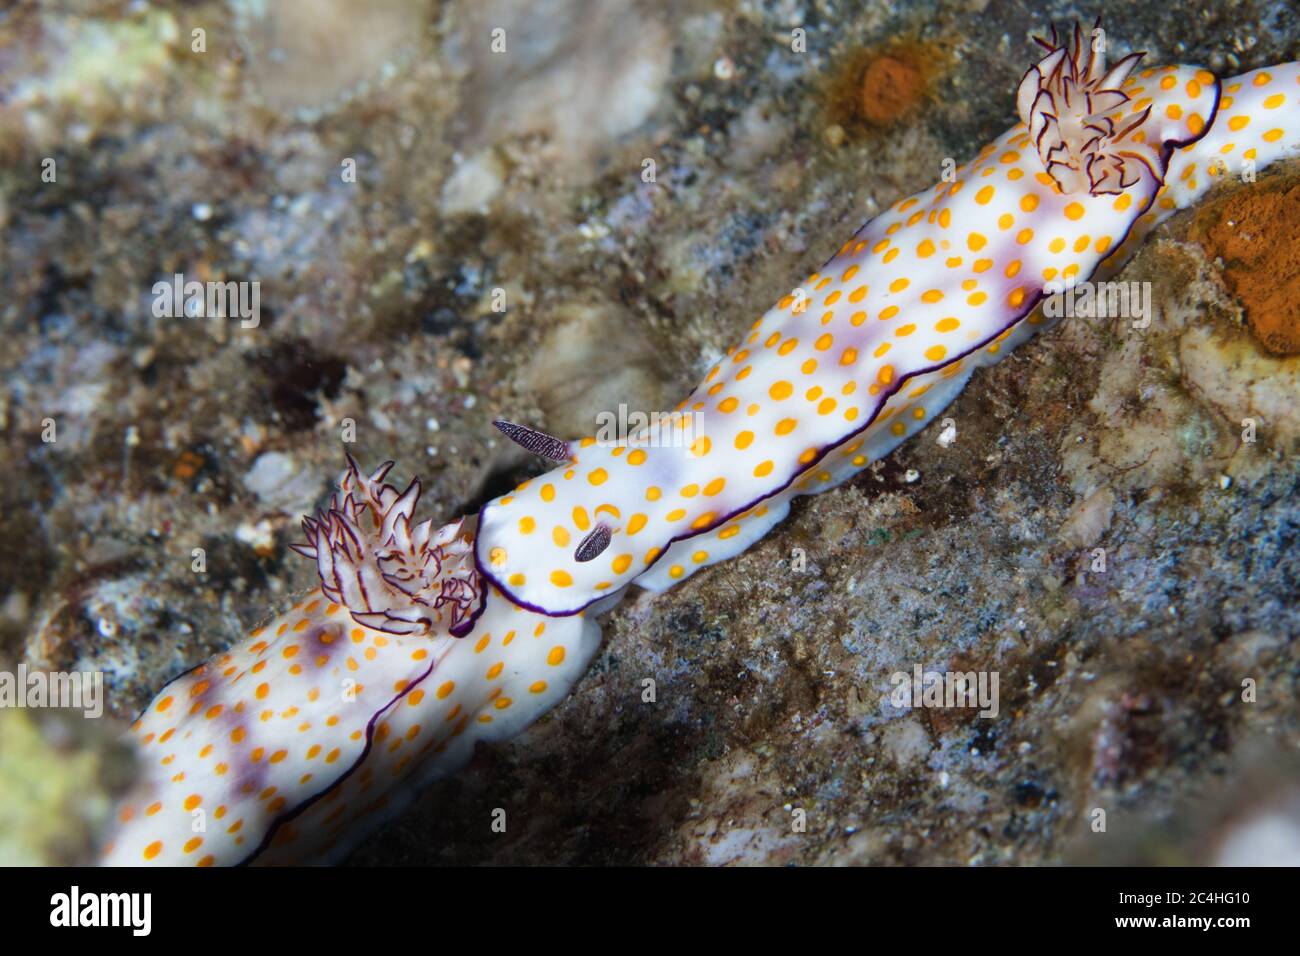 Two Beautiful risbecia (Marsa Bareka) nudibranchs of the Red Sea, one following the other. White body with yellow spots and purple outline around its Stock Photo